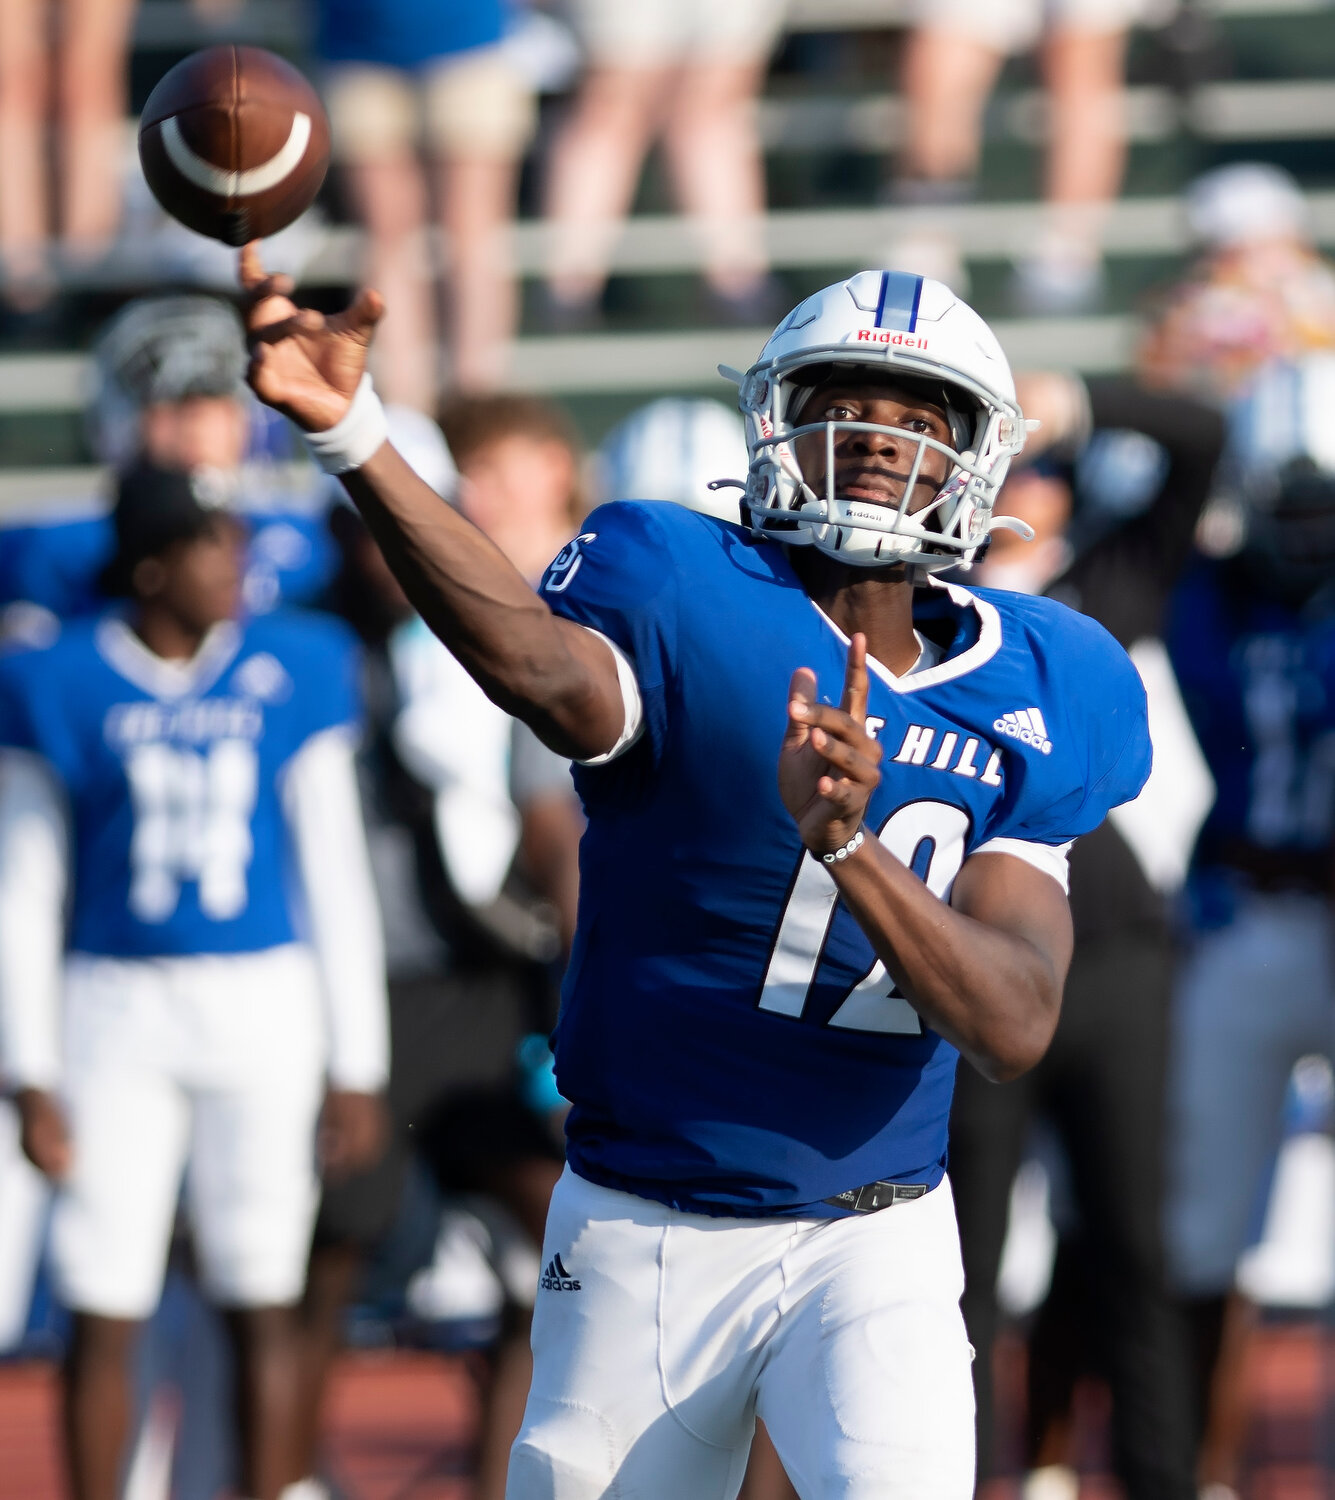 Shorter University quarterback Joshua Brown completes a pass in the fourth quarter against Erskine College, Saturday, Sept. 9, 2023, in Rome, Ga. Shorter won 28-7. (Index/Henry Durand)